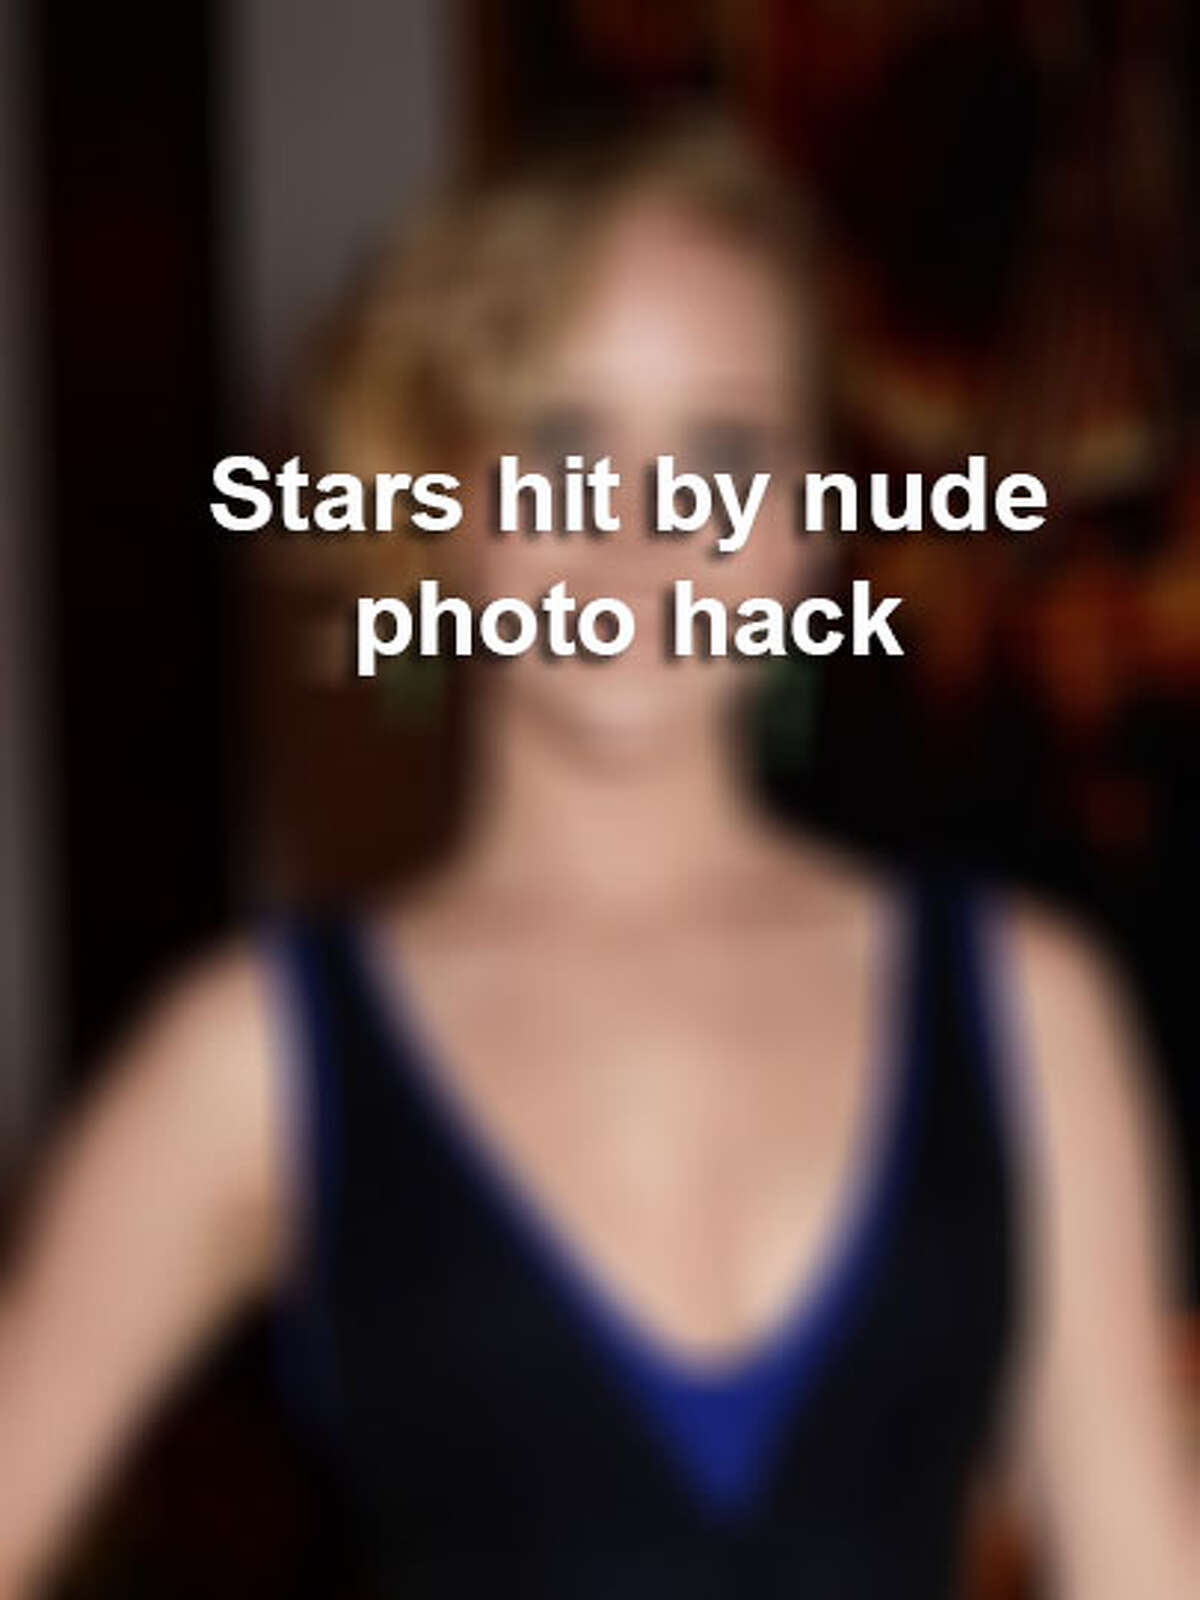 The actress' comments come just days after a scandal involving hundreds of leaked nude photos of female celebrities that were accessed from Apple's iCloud service by a hacker who posted the photos to the website 4chan.